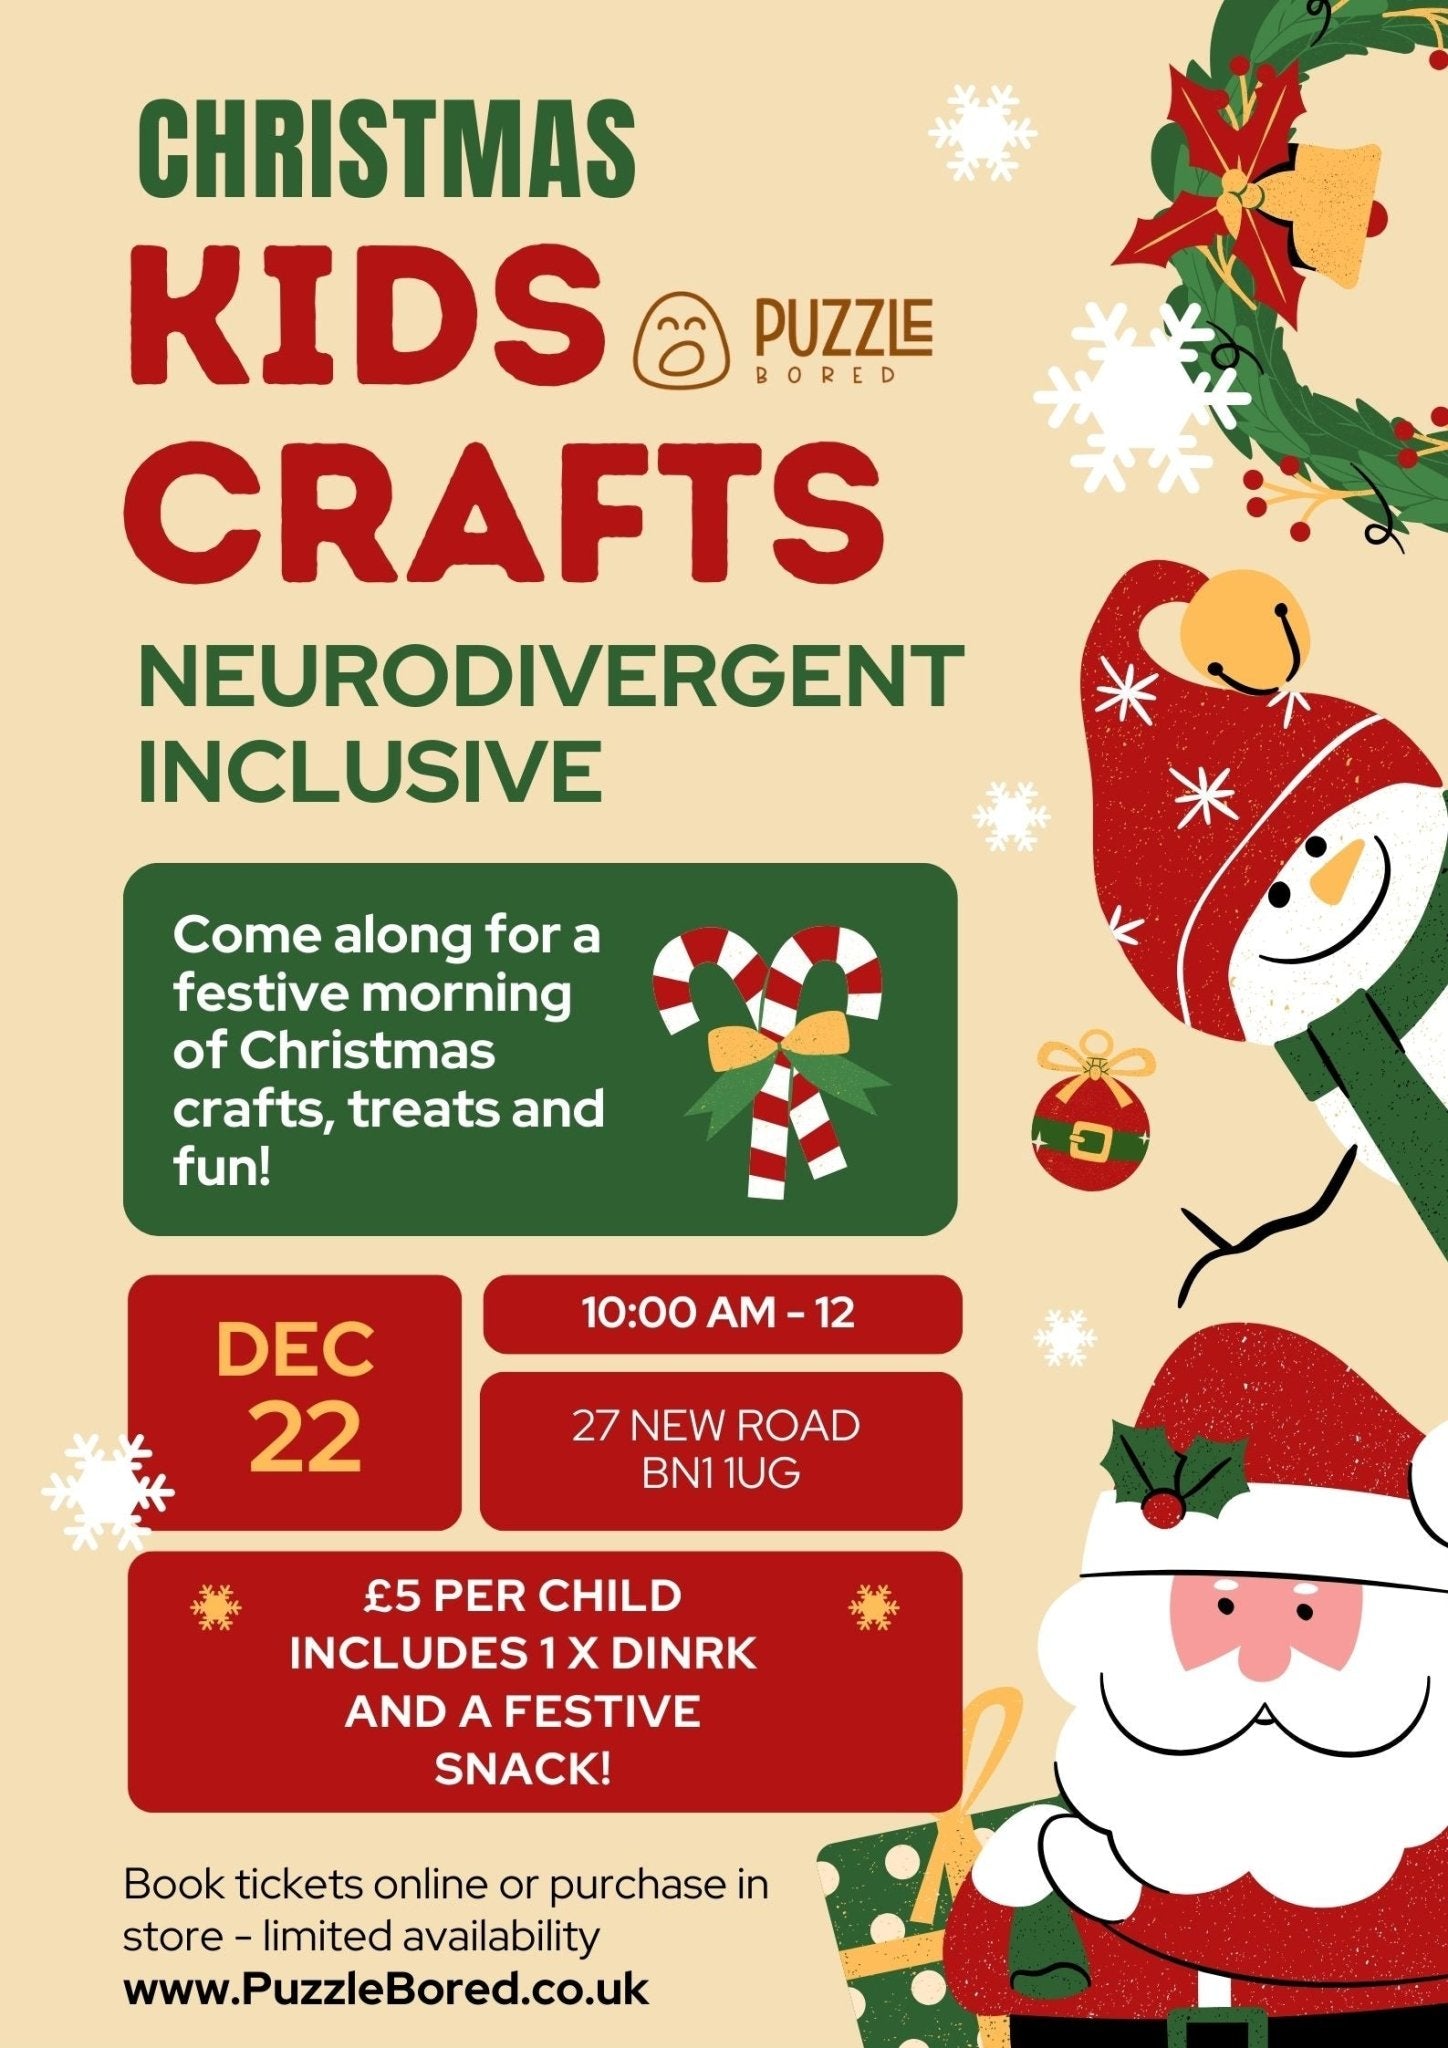 Kids Christmas Crafts - Neurodivergent Inclusive - 22nd December 10.00 - 12.00 - Puzzle Bored